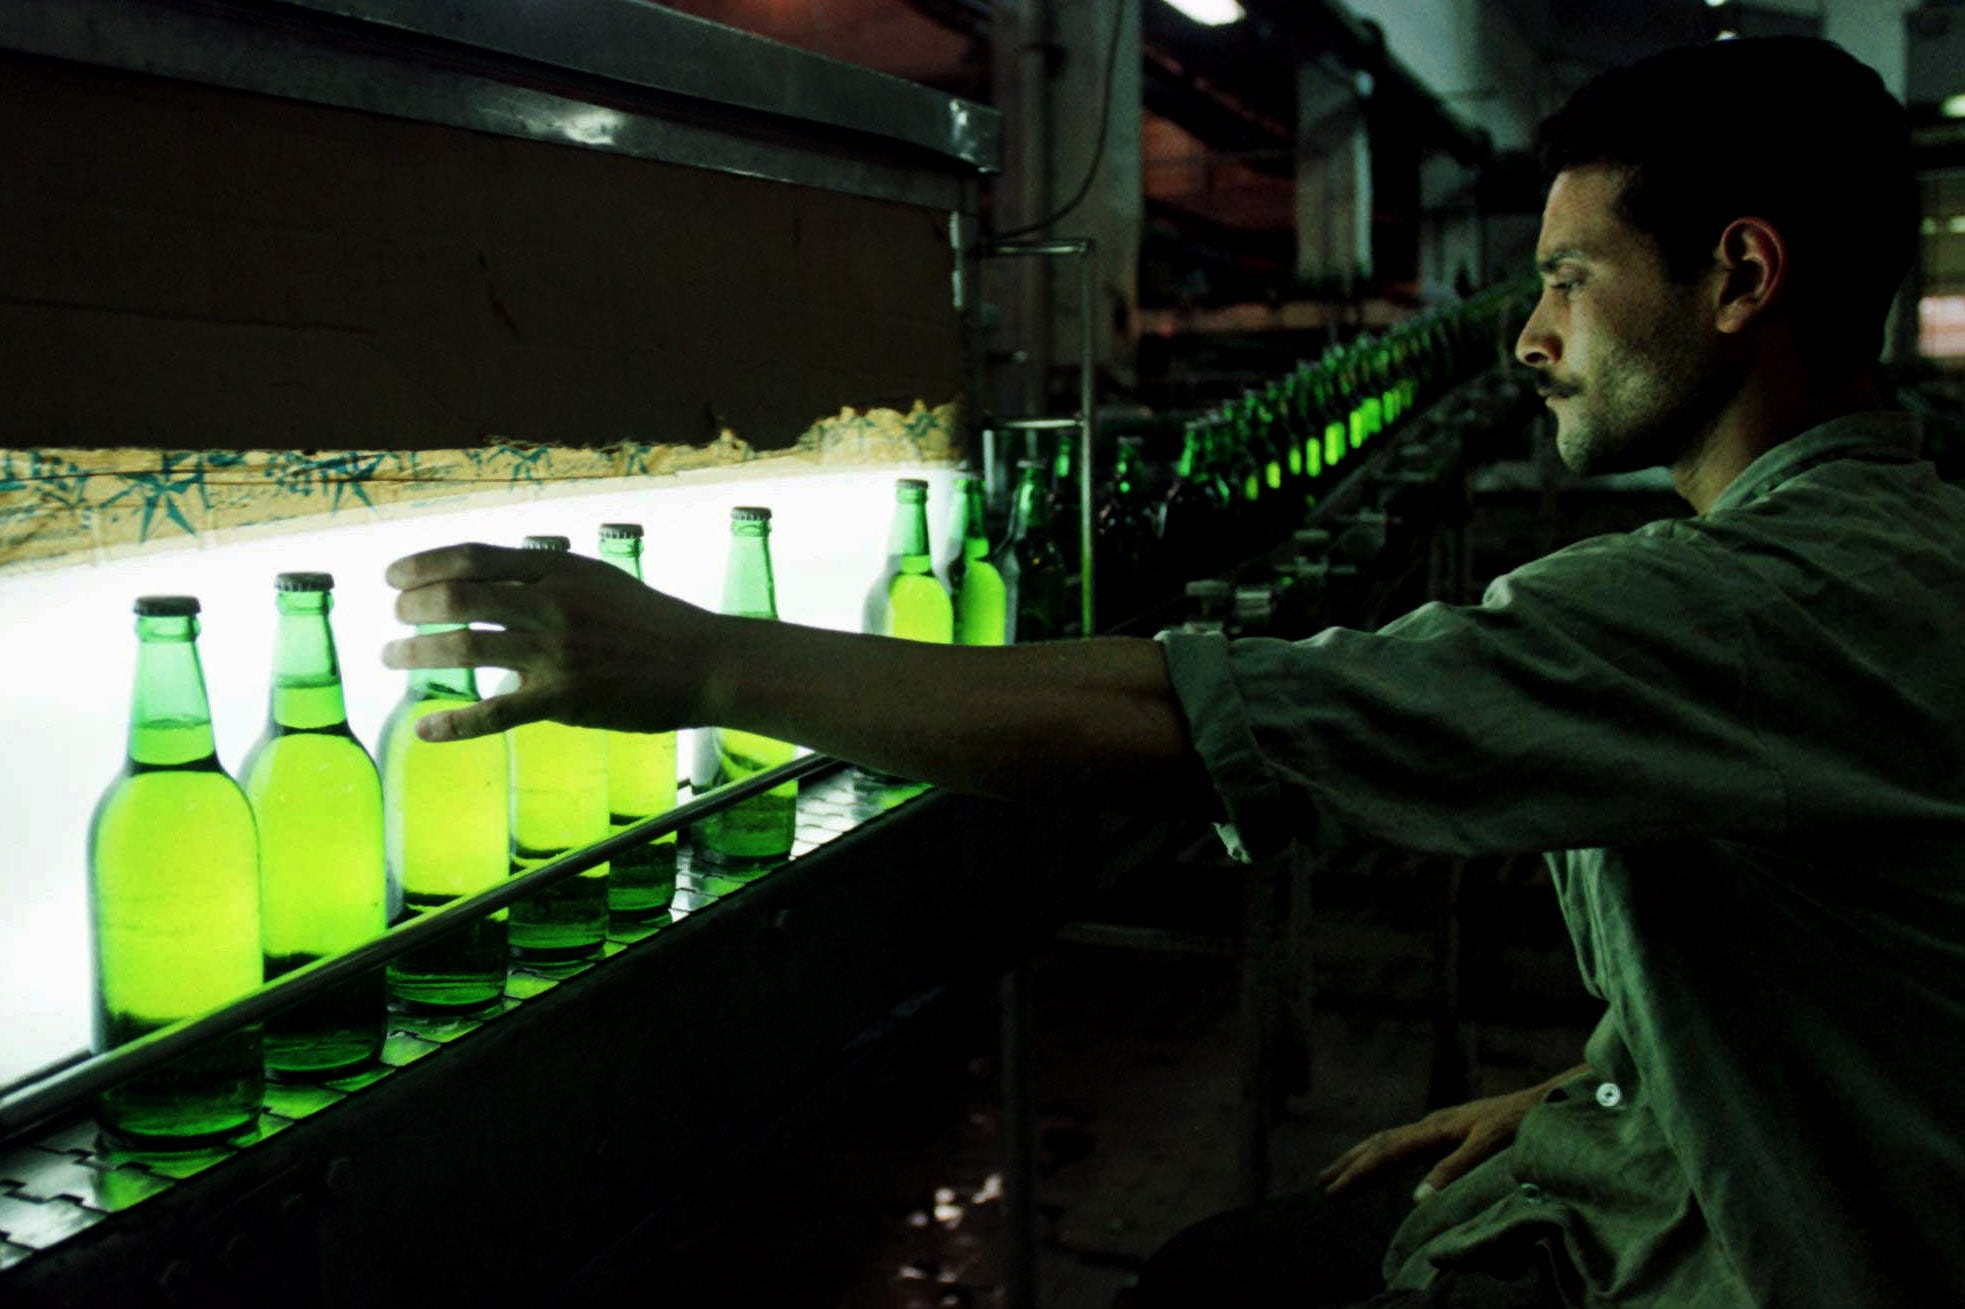 An Egyptian worker inspects a bottle of Stella beer rolling down the line at a factory in Cairo. 